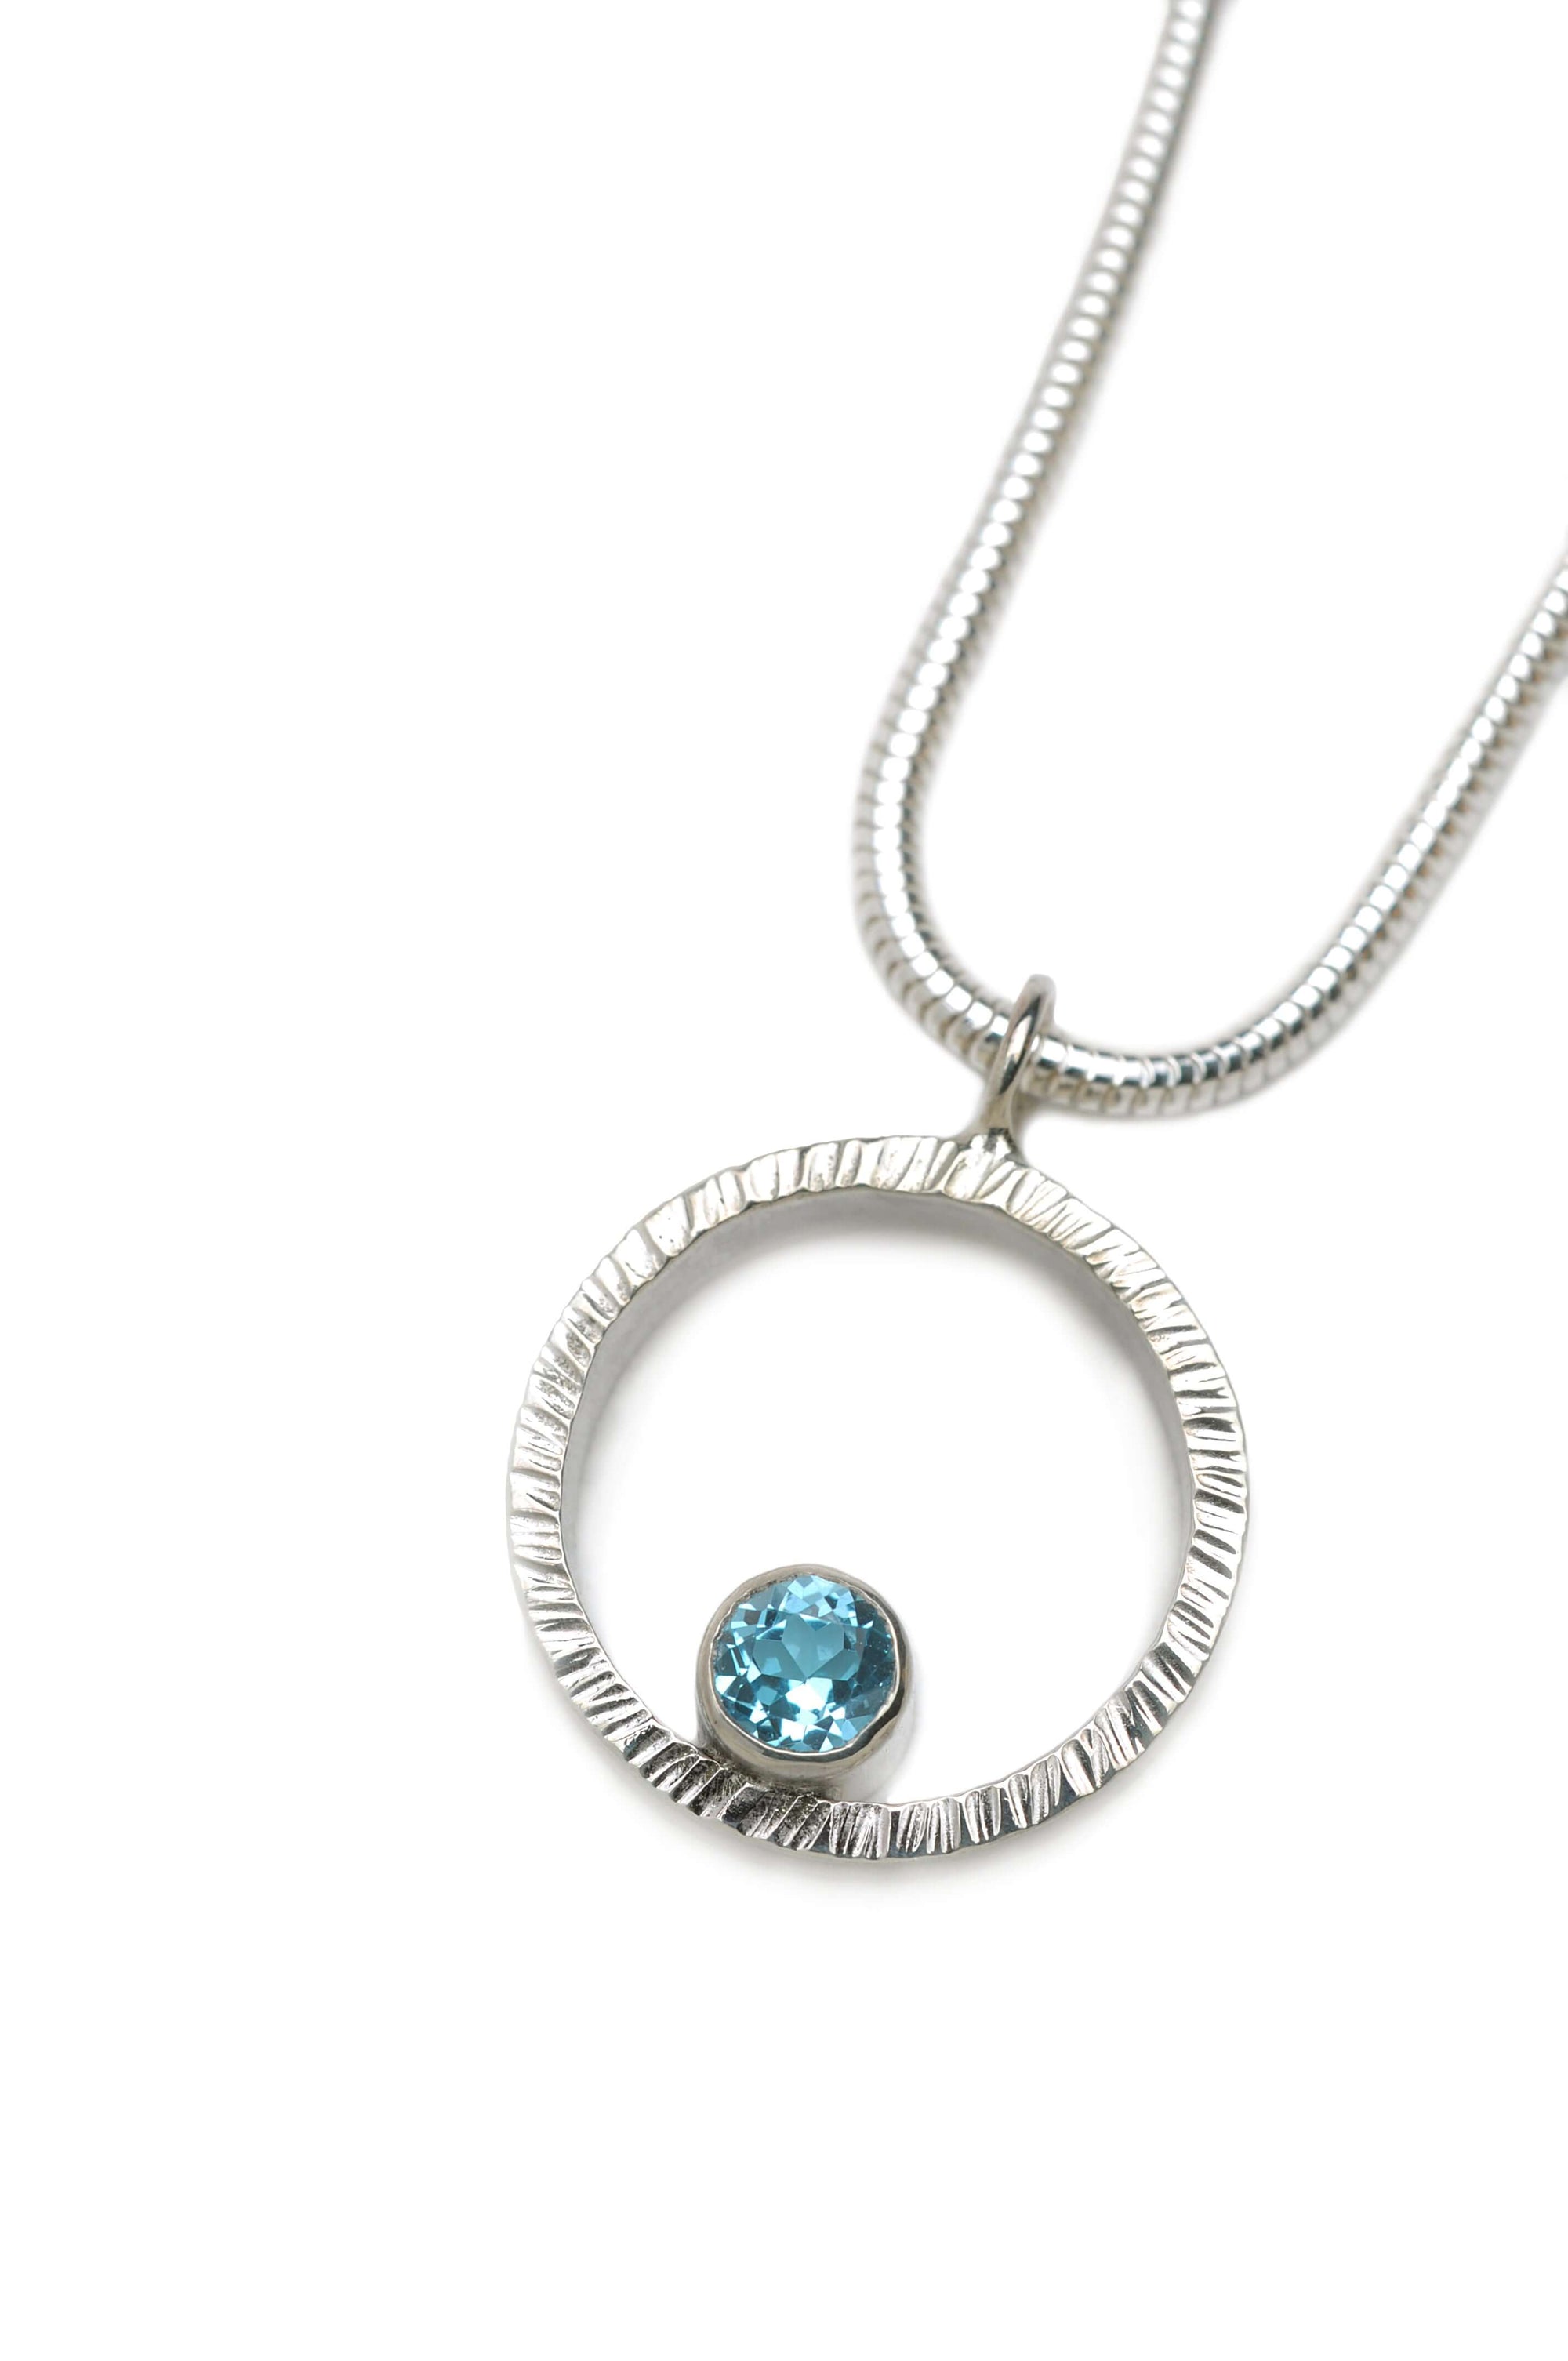 A hammered circle pendant necklace with Swiss blue topaz